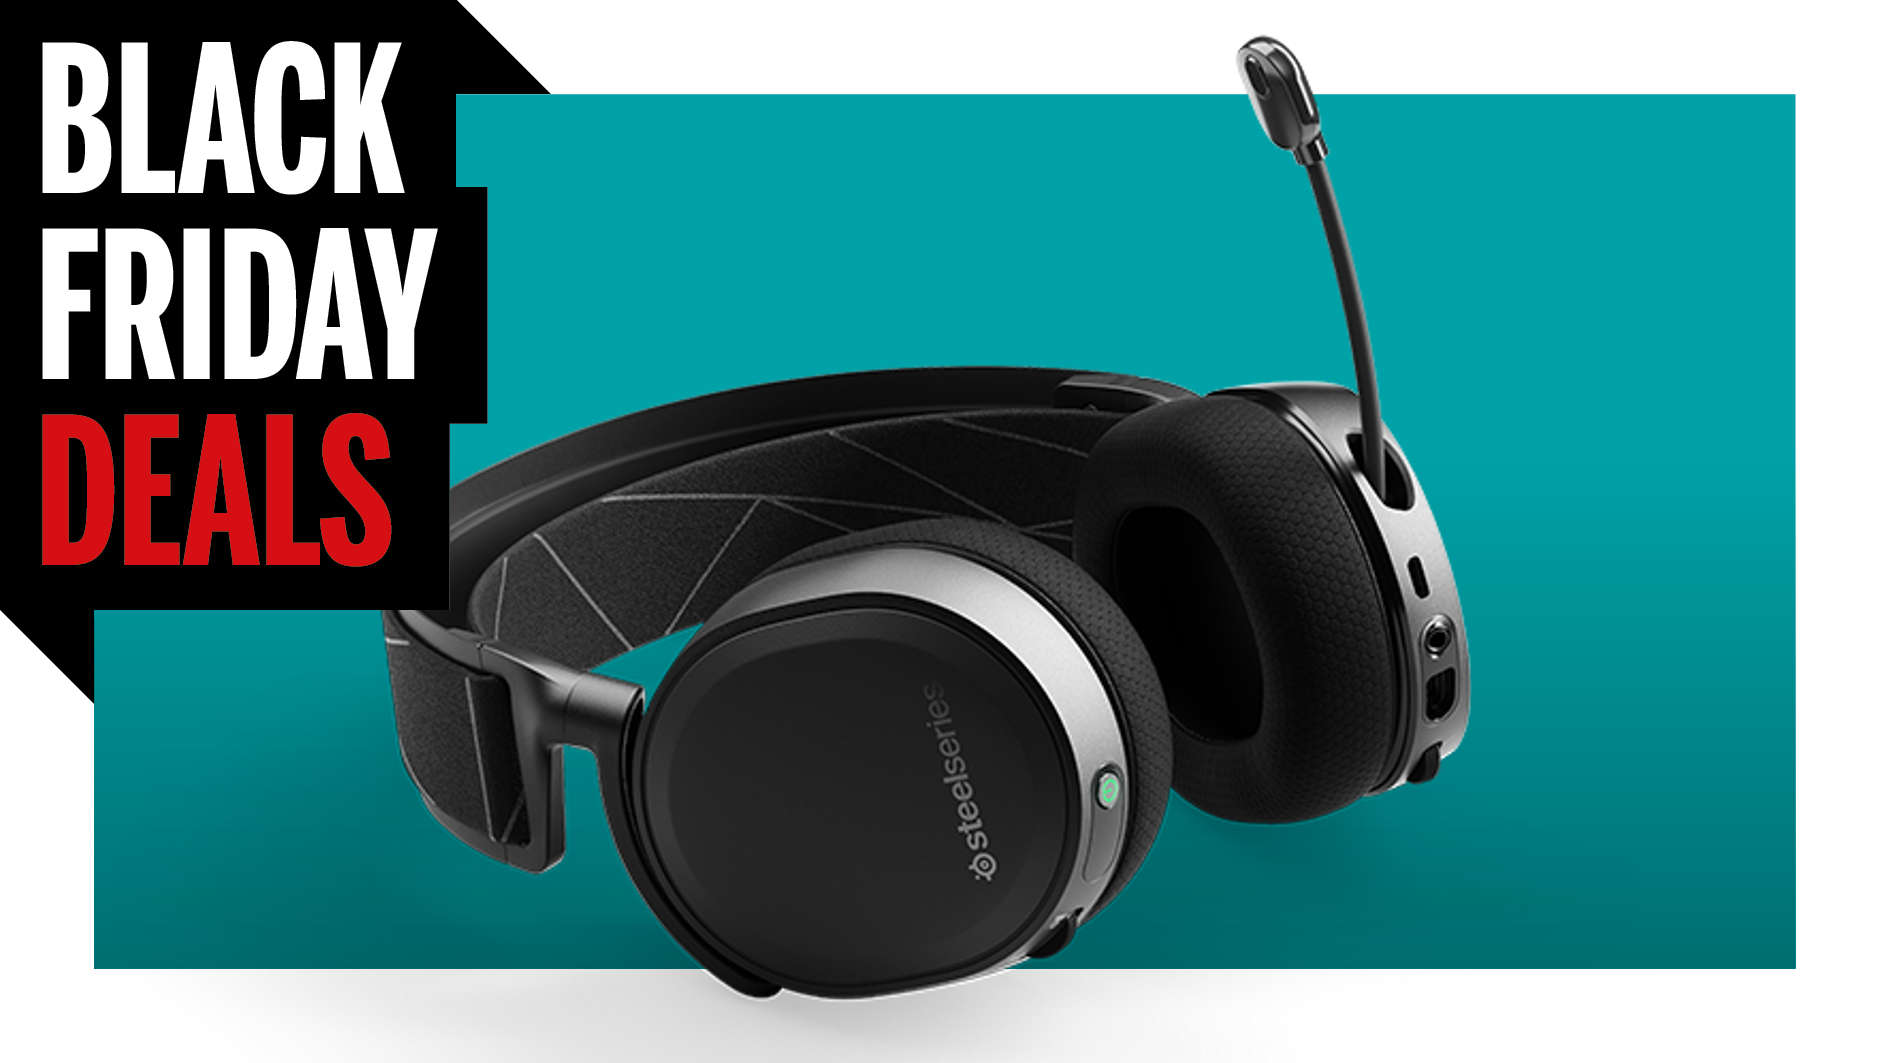 Black Friday gaming headset deals 2022: discounts that are music to our ears